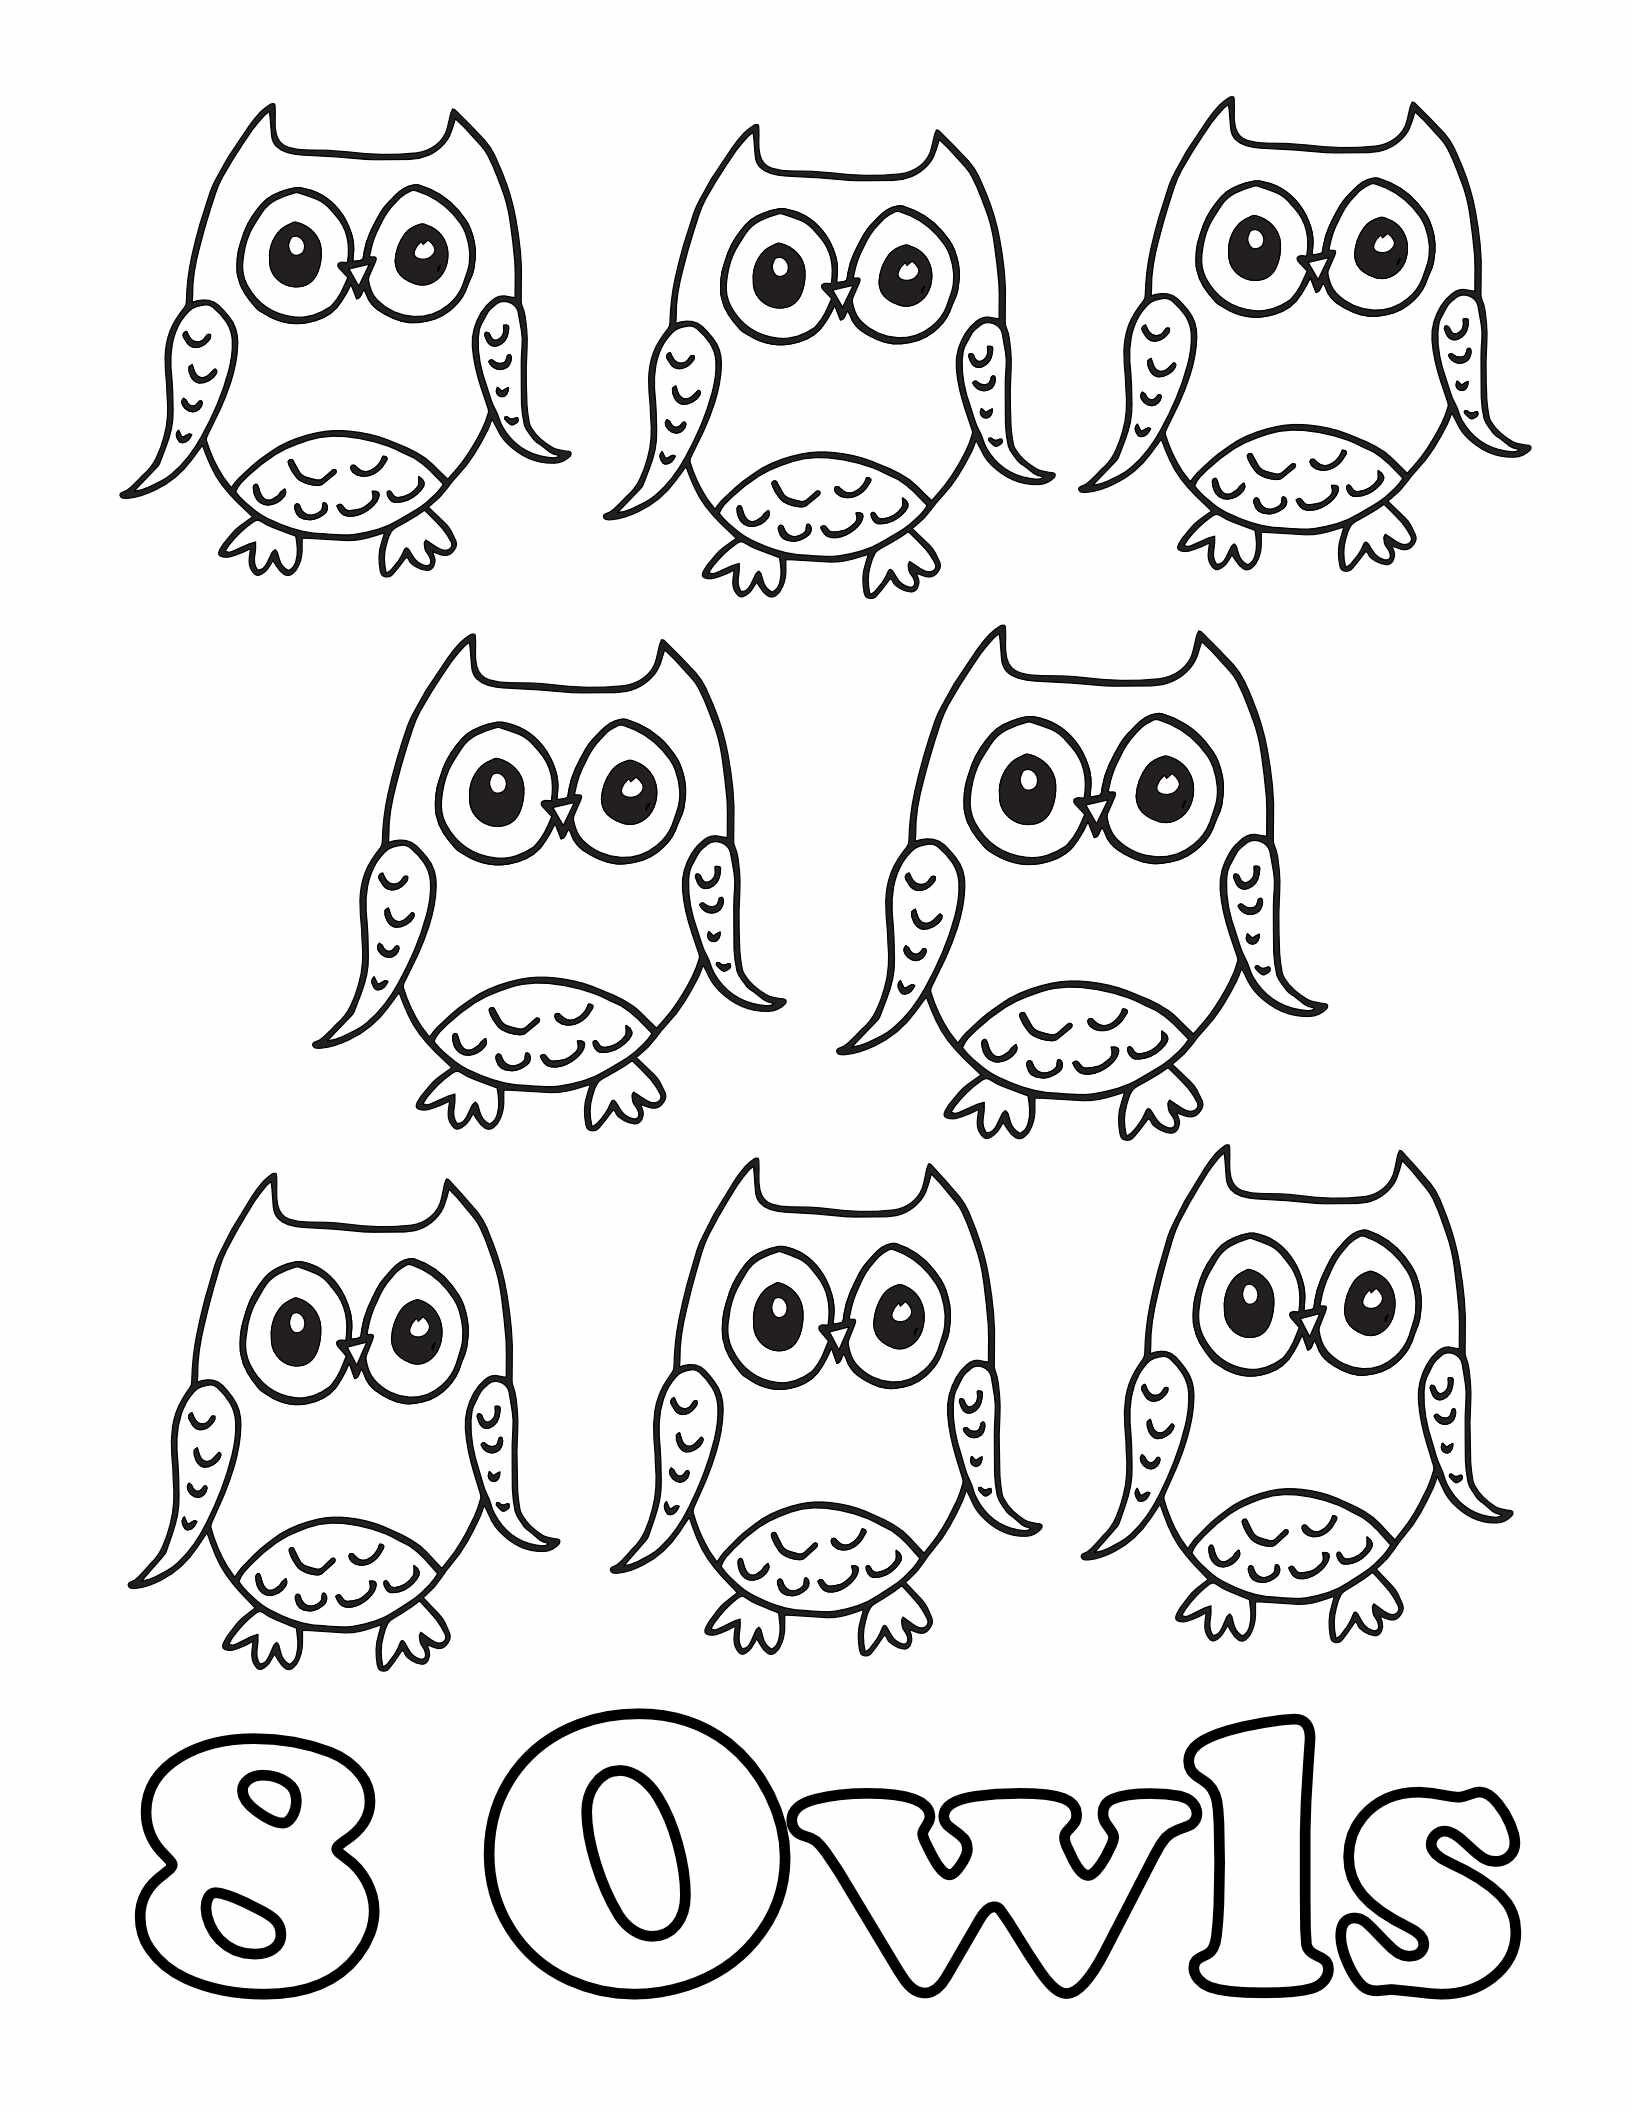 10 Free Animal Number Coloring Pages -  8 Owls